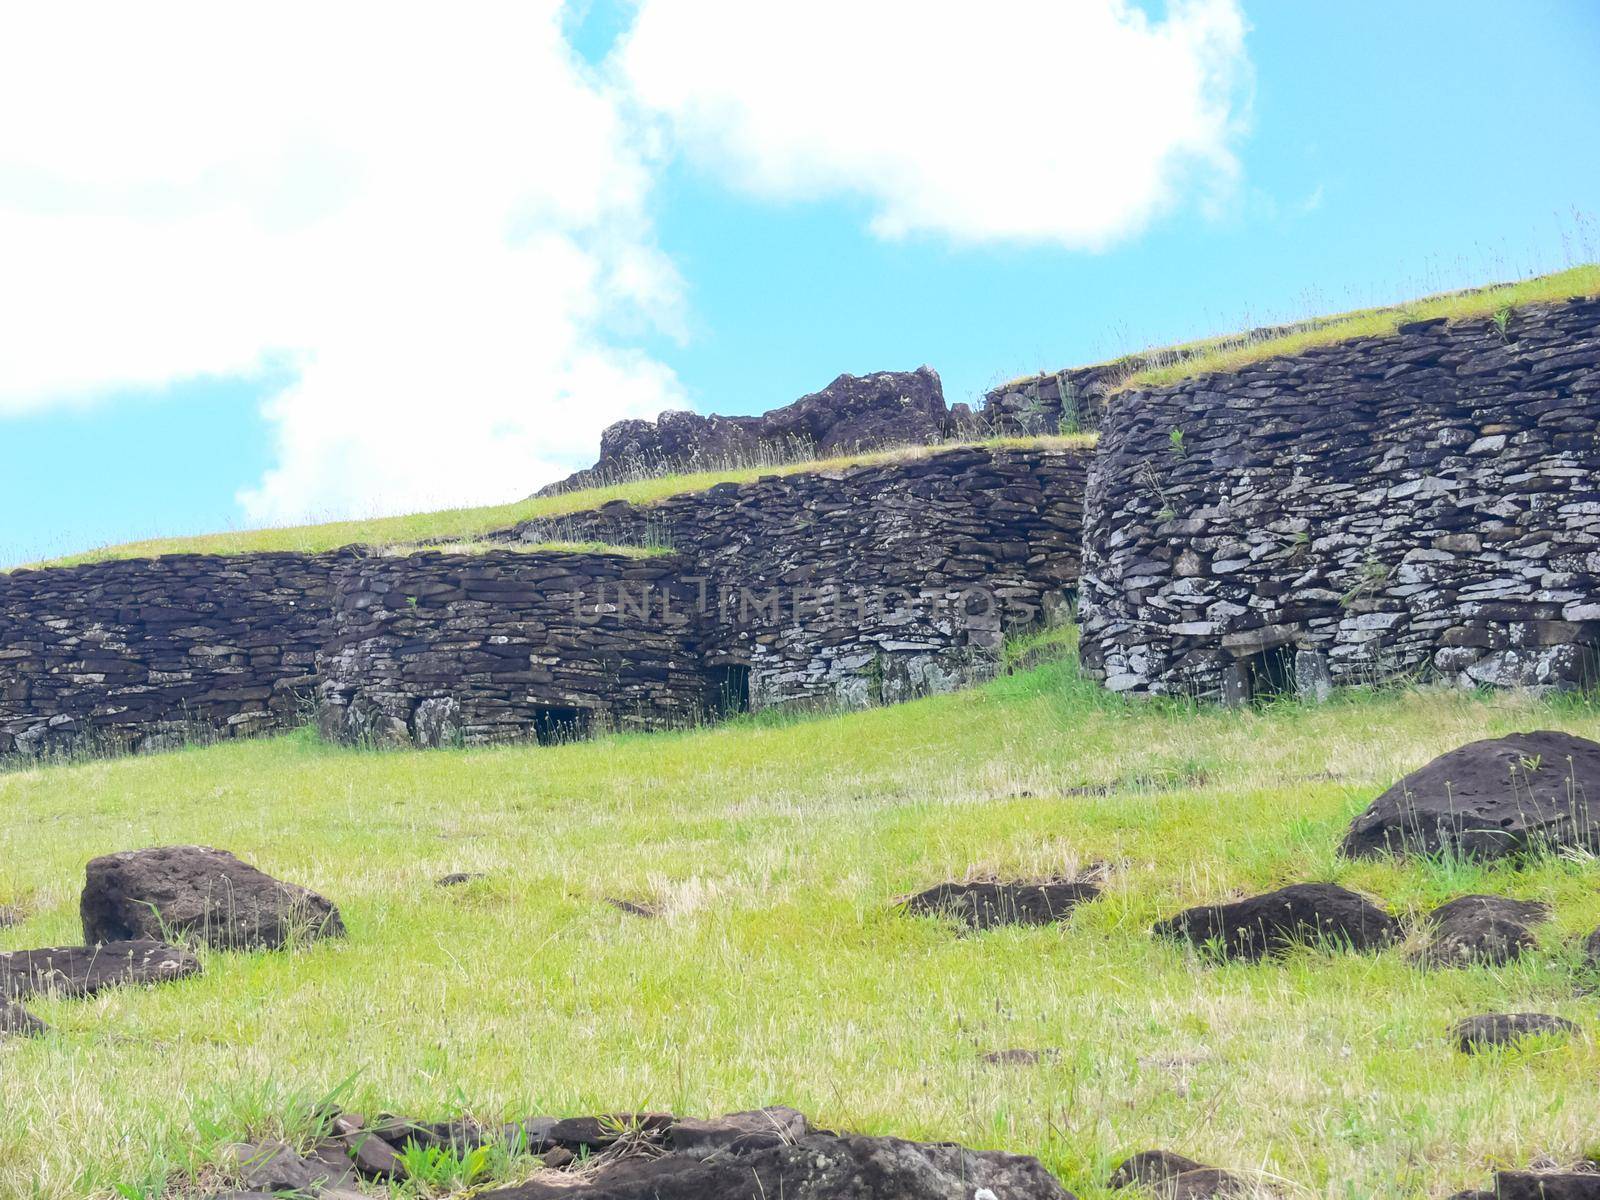 dwellings of ancient aboriginals on Easter Island. made of shelter stones and walls. by DePo